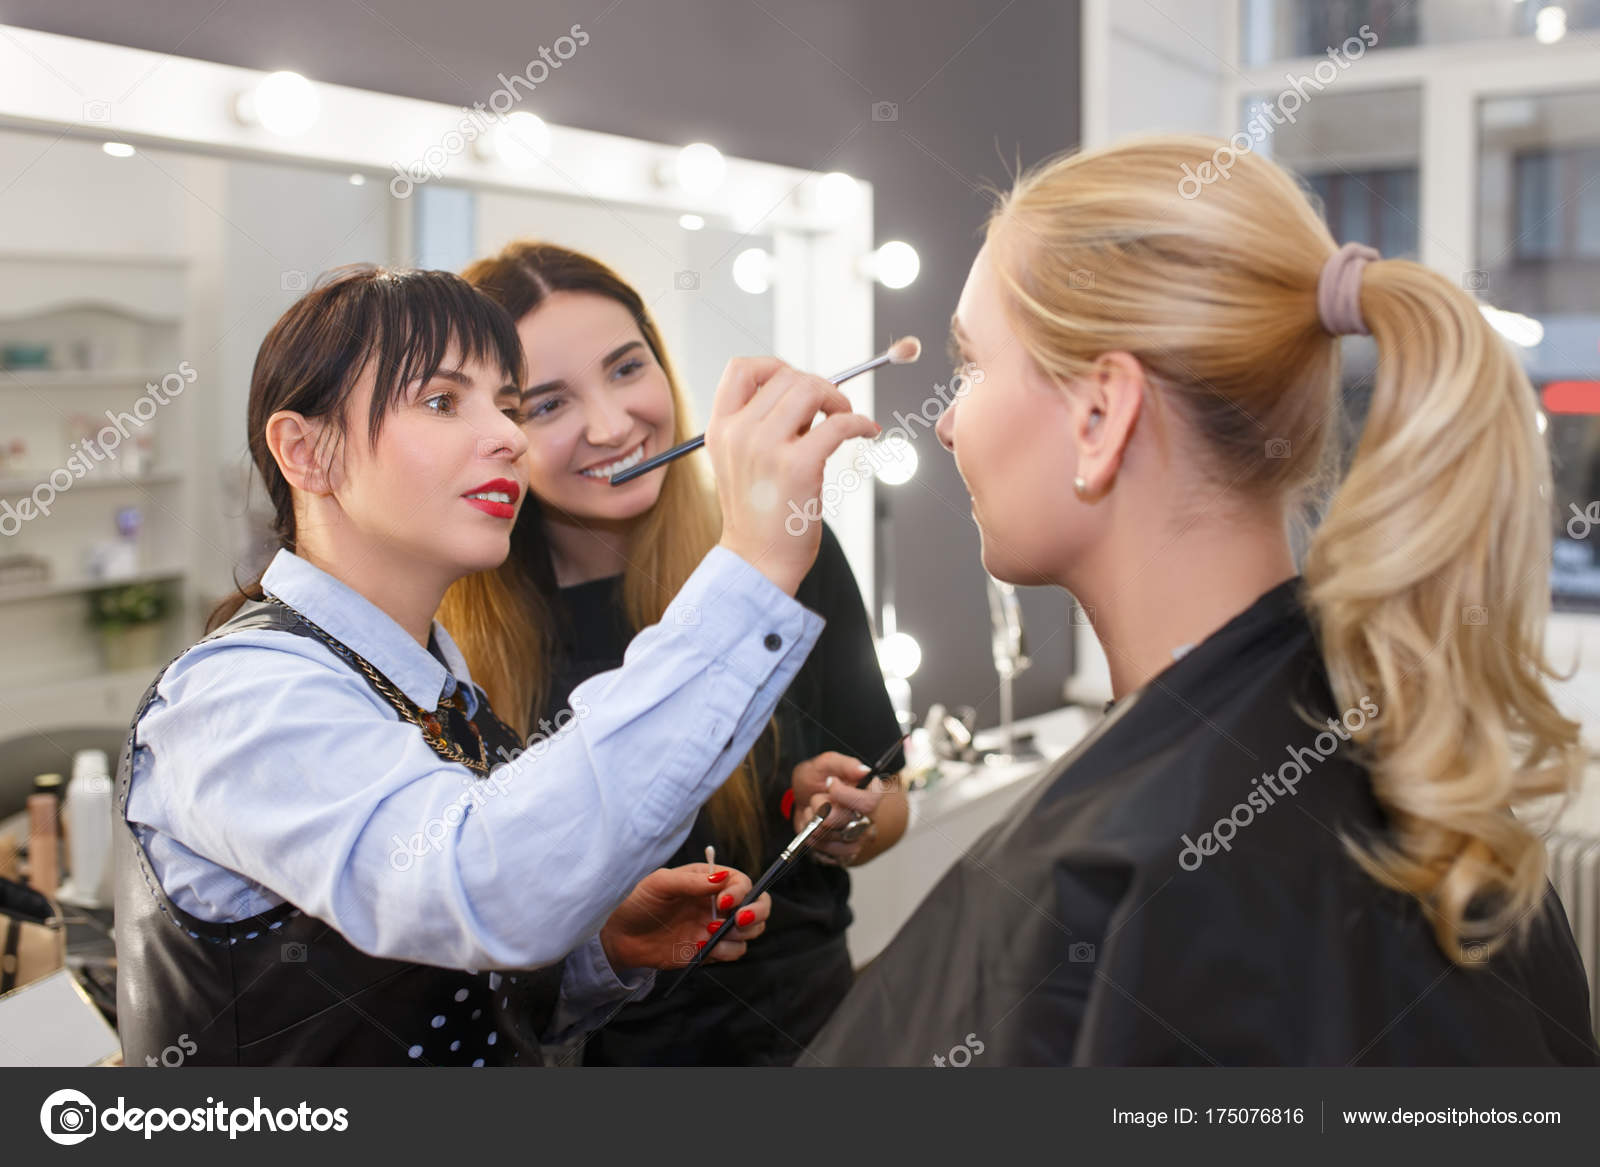 Makeup Tutorial Lesson At Beauty School Stock Photo AlterPhoto